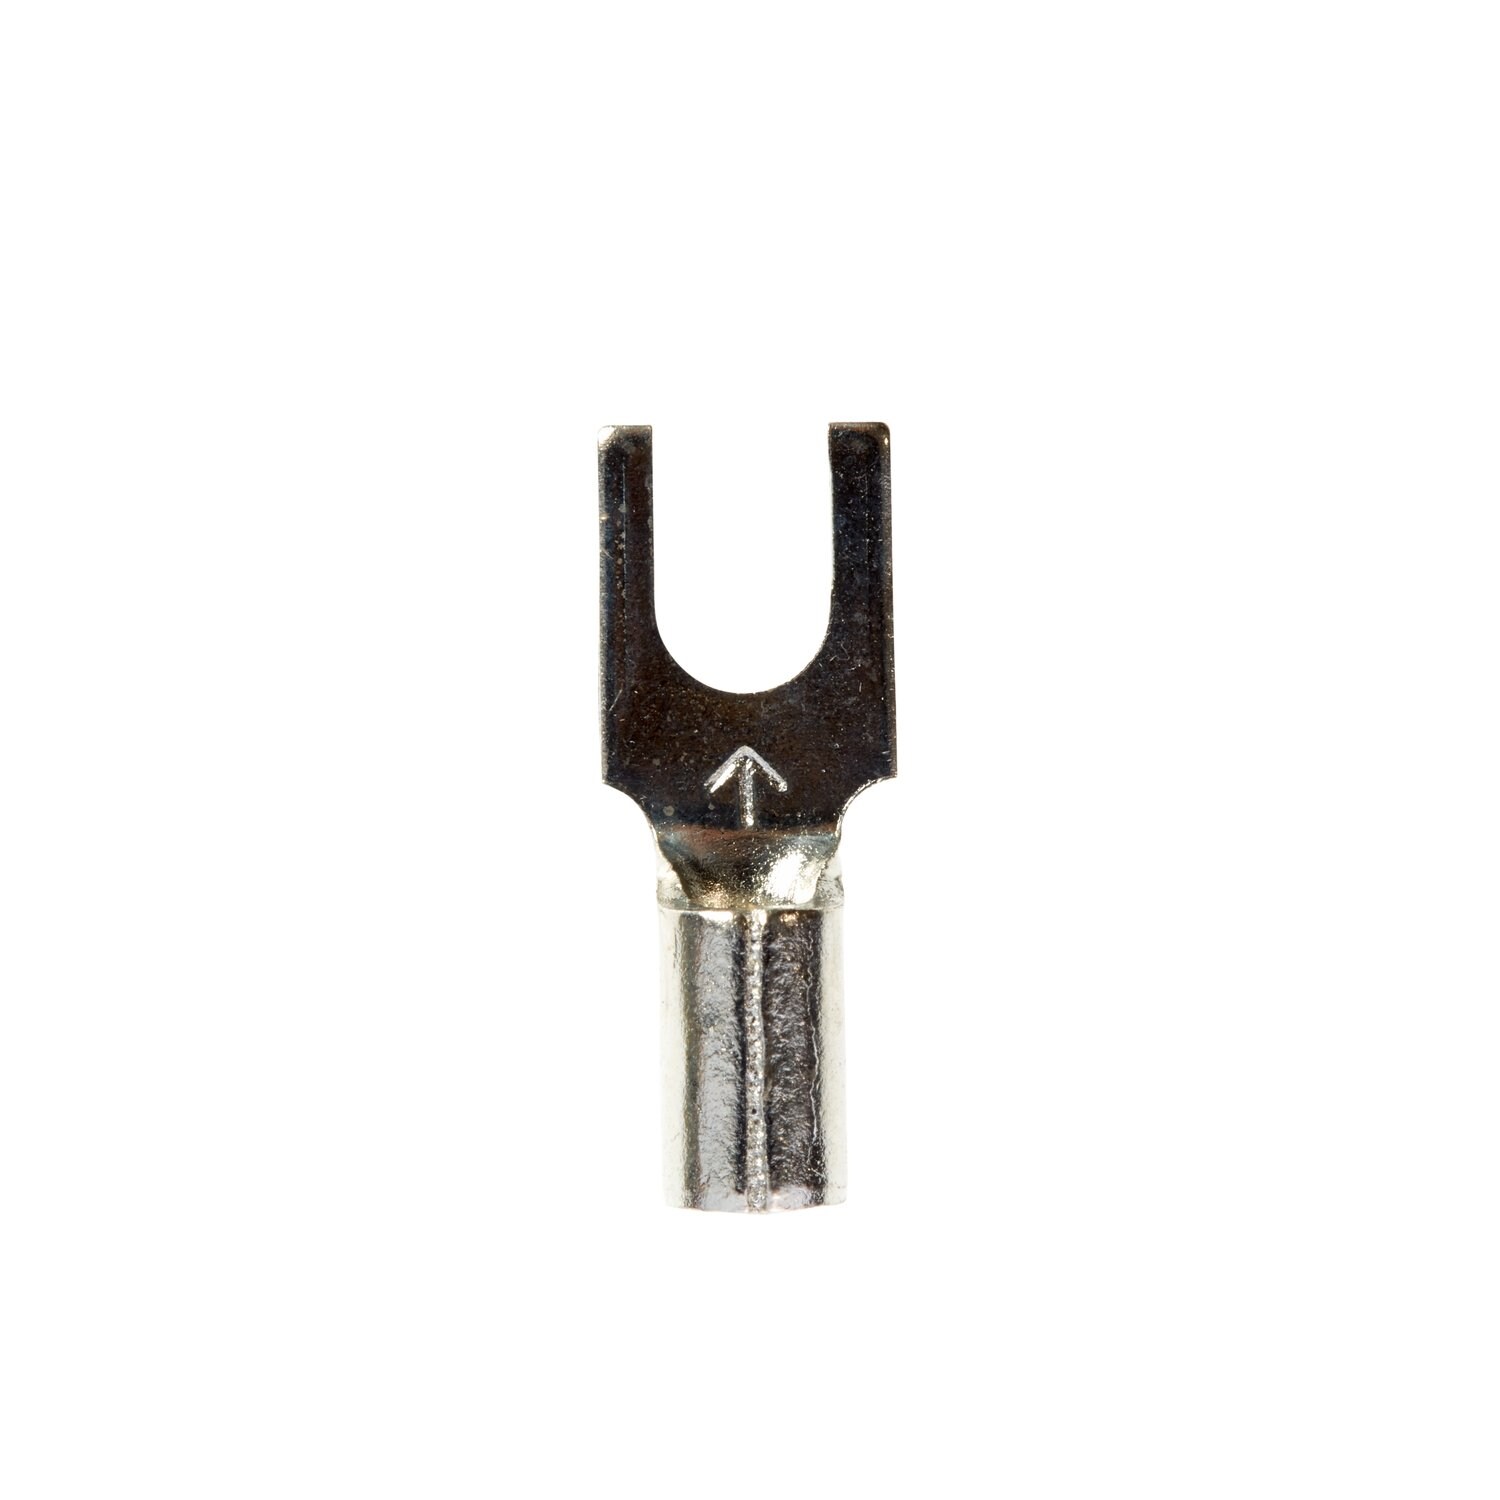 7100165308 - 3M Scotchlok Block Fork Non-Insulated, 100/bottle, M14-6FB/SX,
suitable for use in a terminal block, 500/Case